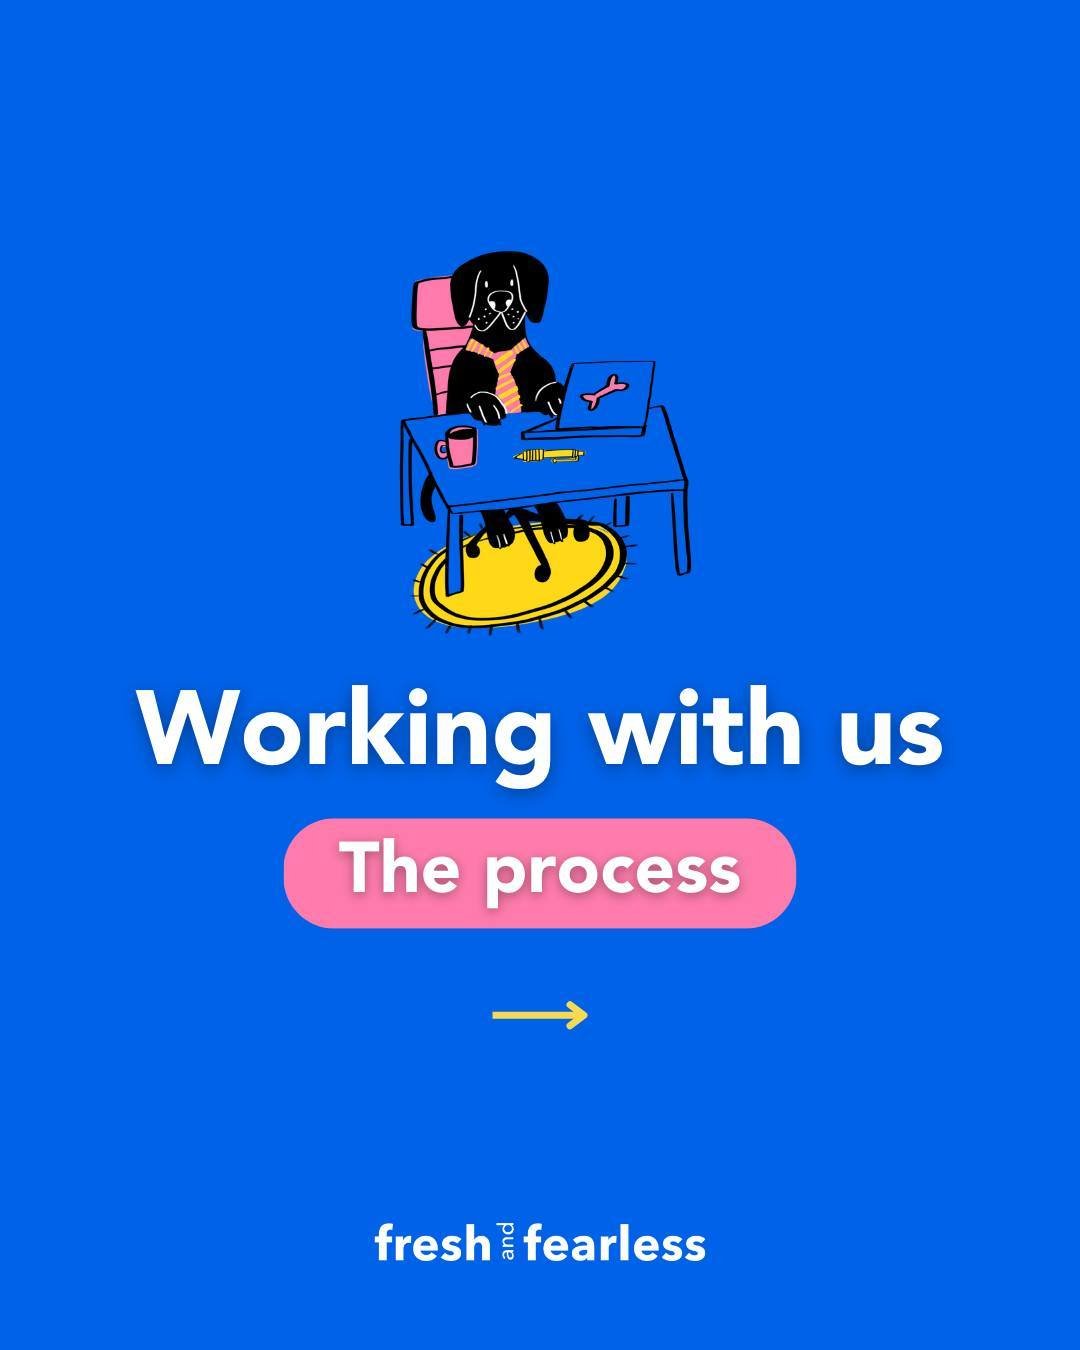 Ever wonder what the process looks like when you work with Fresh and Fearless? 🤔⁠
⁠
From the point of enquiring with us, there is a simple 4-step process to get our partnership up and running:⁠
⁠
🔍Discovery Process⁠
💻Proposal⁠
📝Contract⁠
💼Onboar